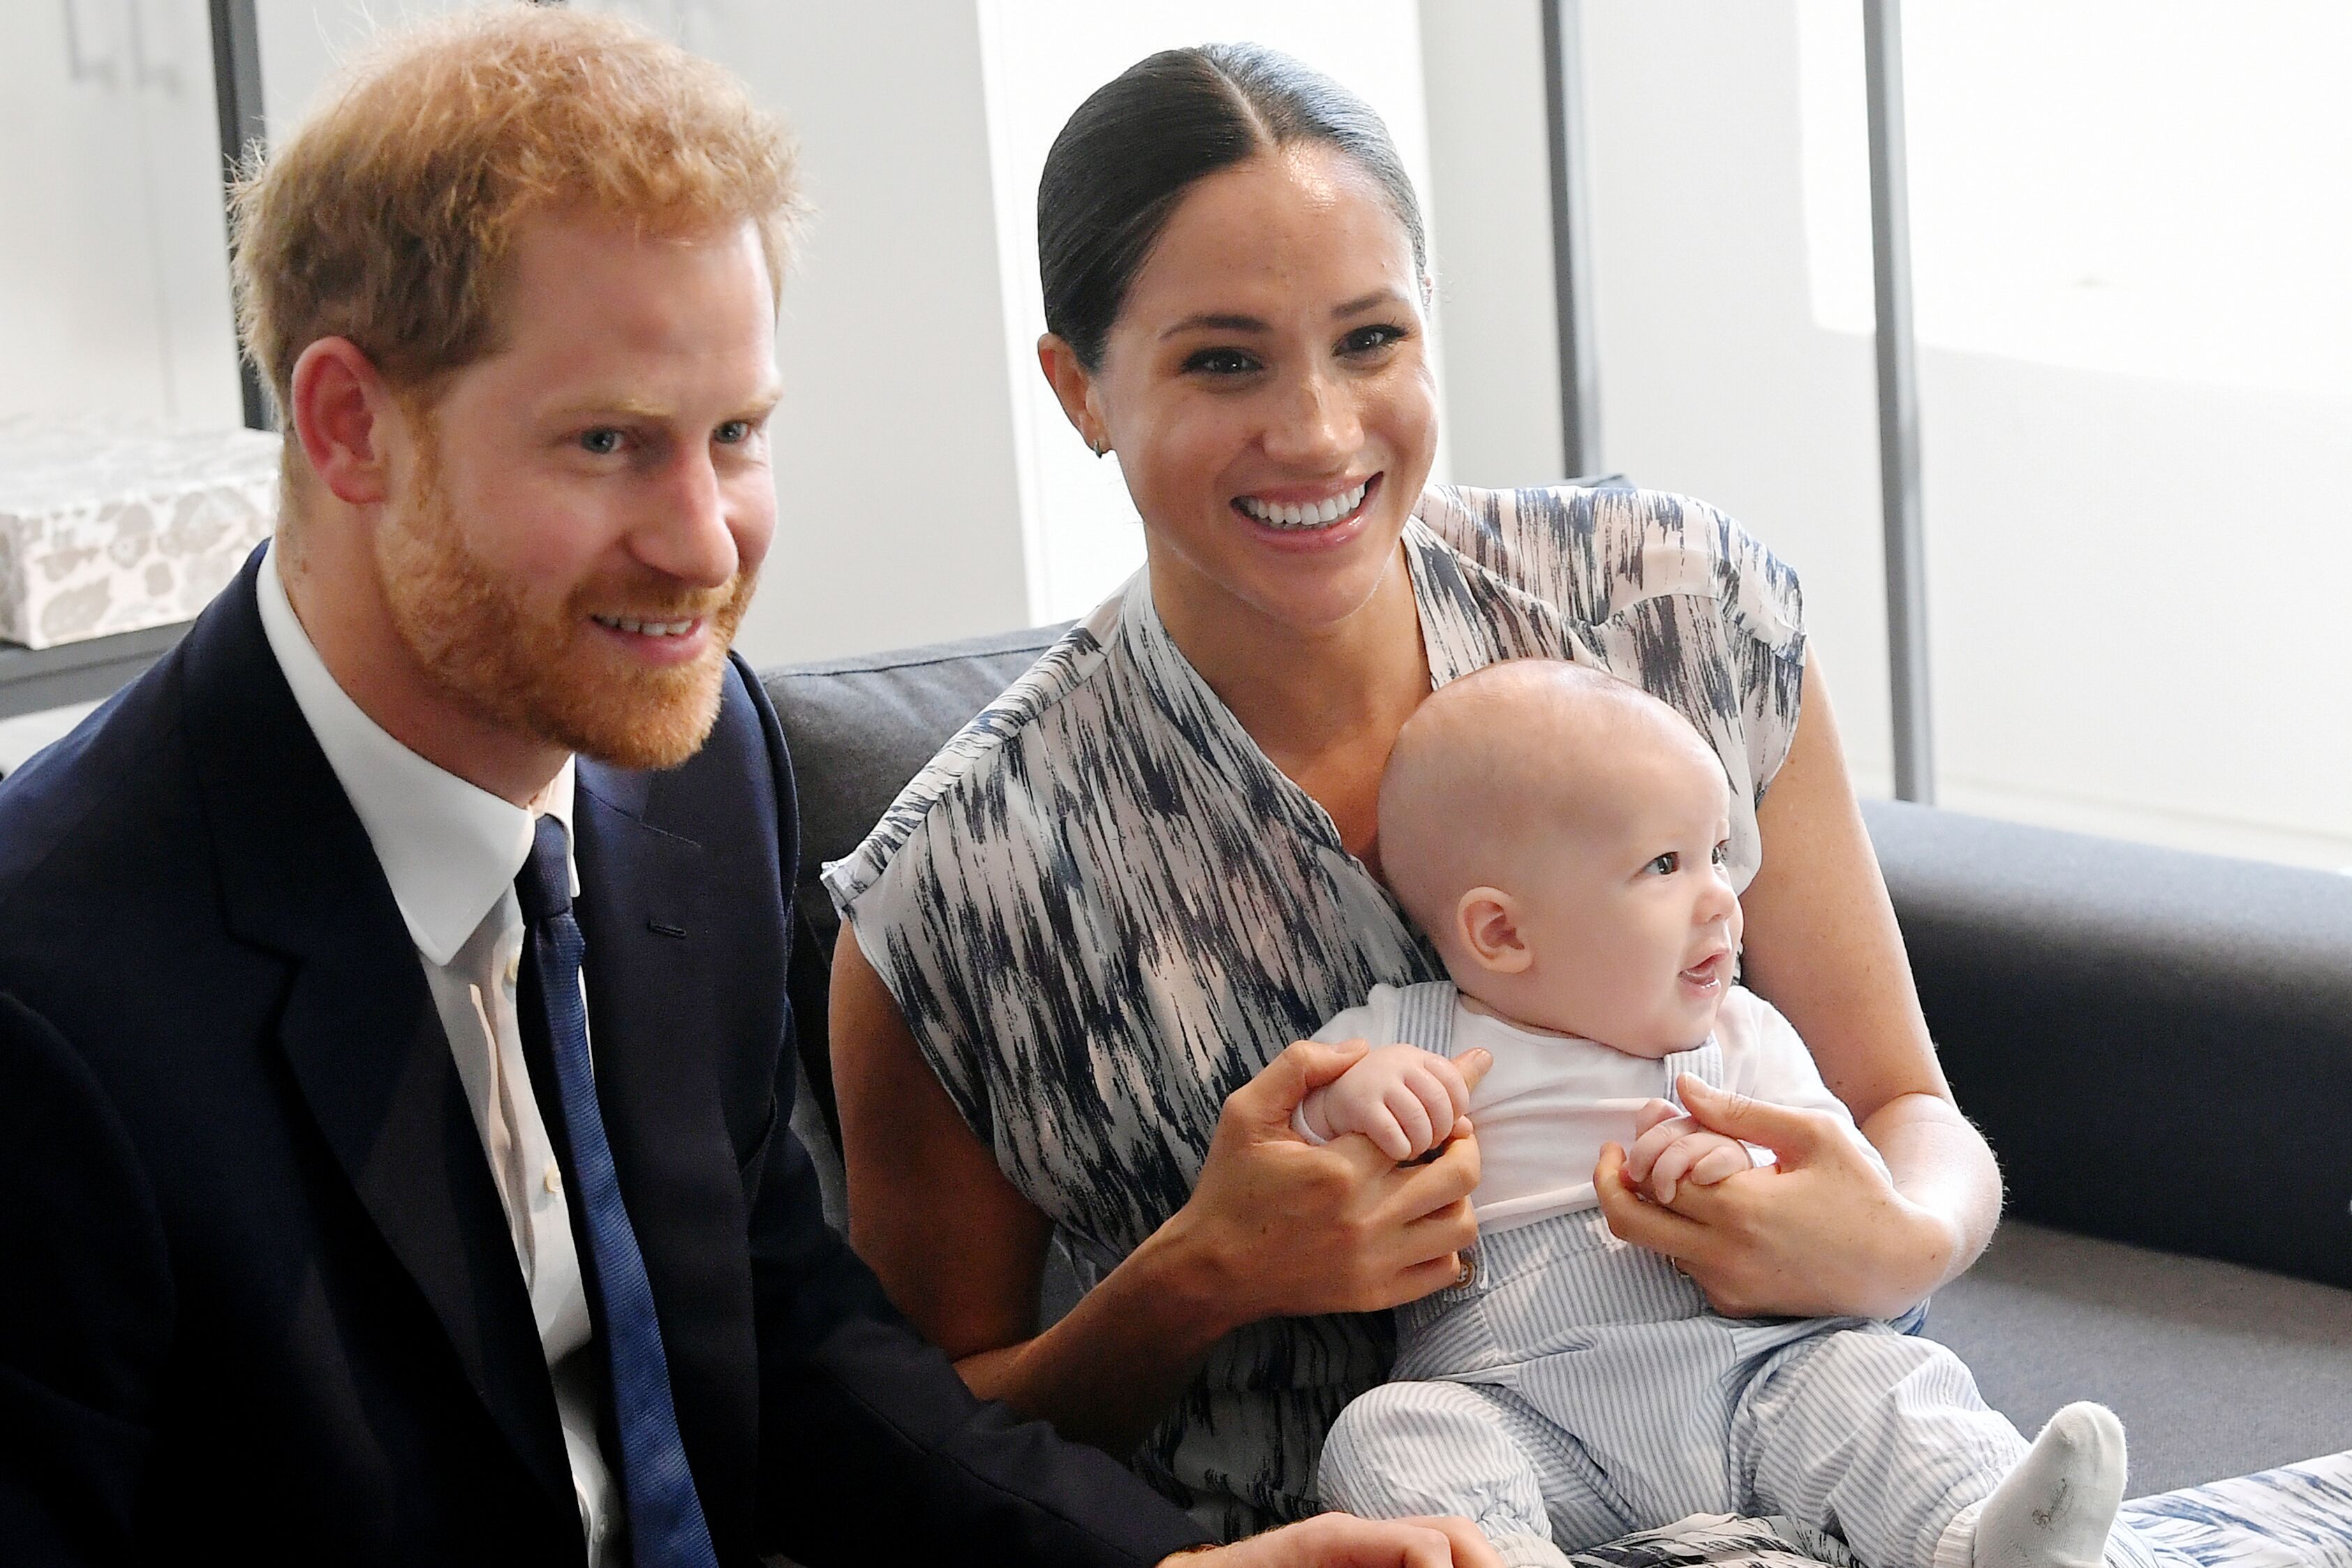 Prince Harry, Meghan, and their baby son Archie Mountbatten-Windsor meet Archbishop Desmond Tutu during their royal tour of South Africa on September 25, 2019, in Cape Town, South Africa | Photo: Getty Images